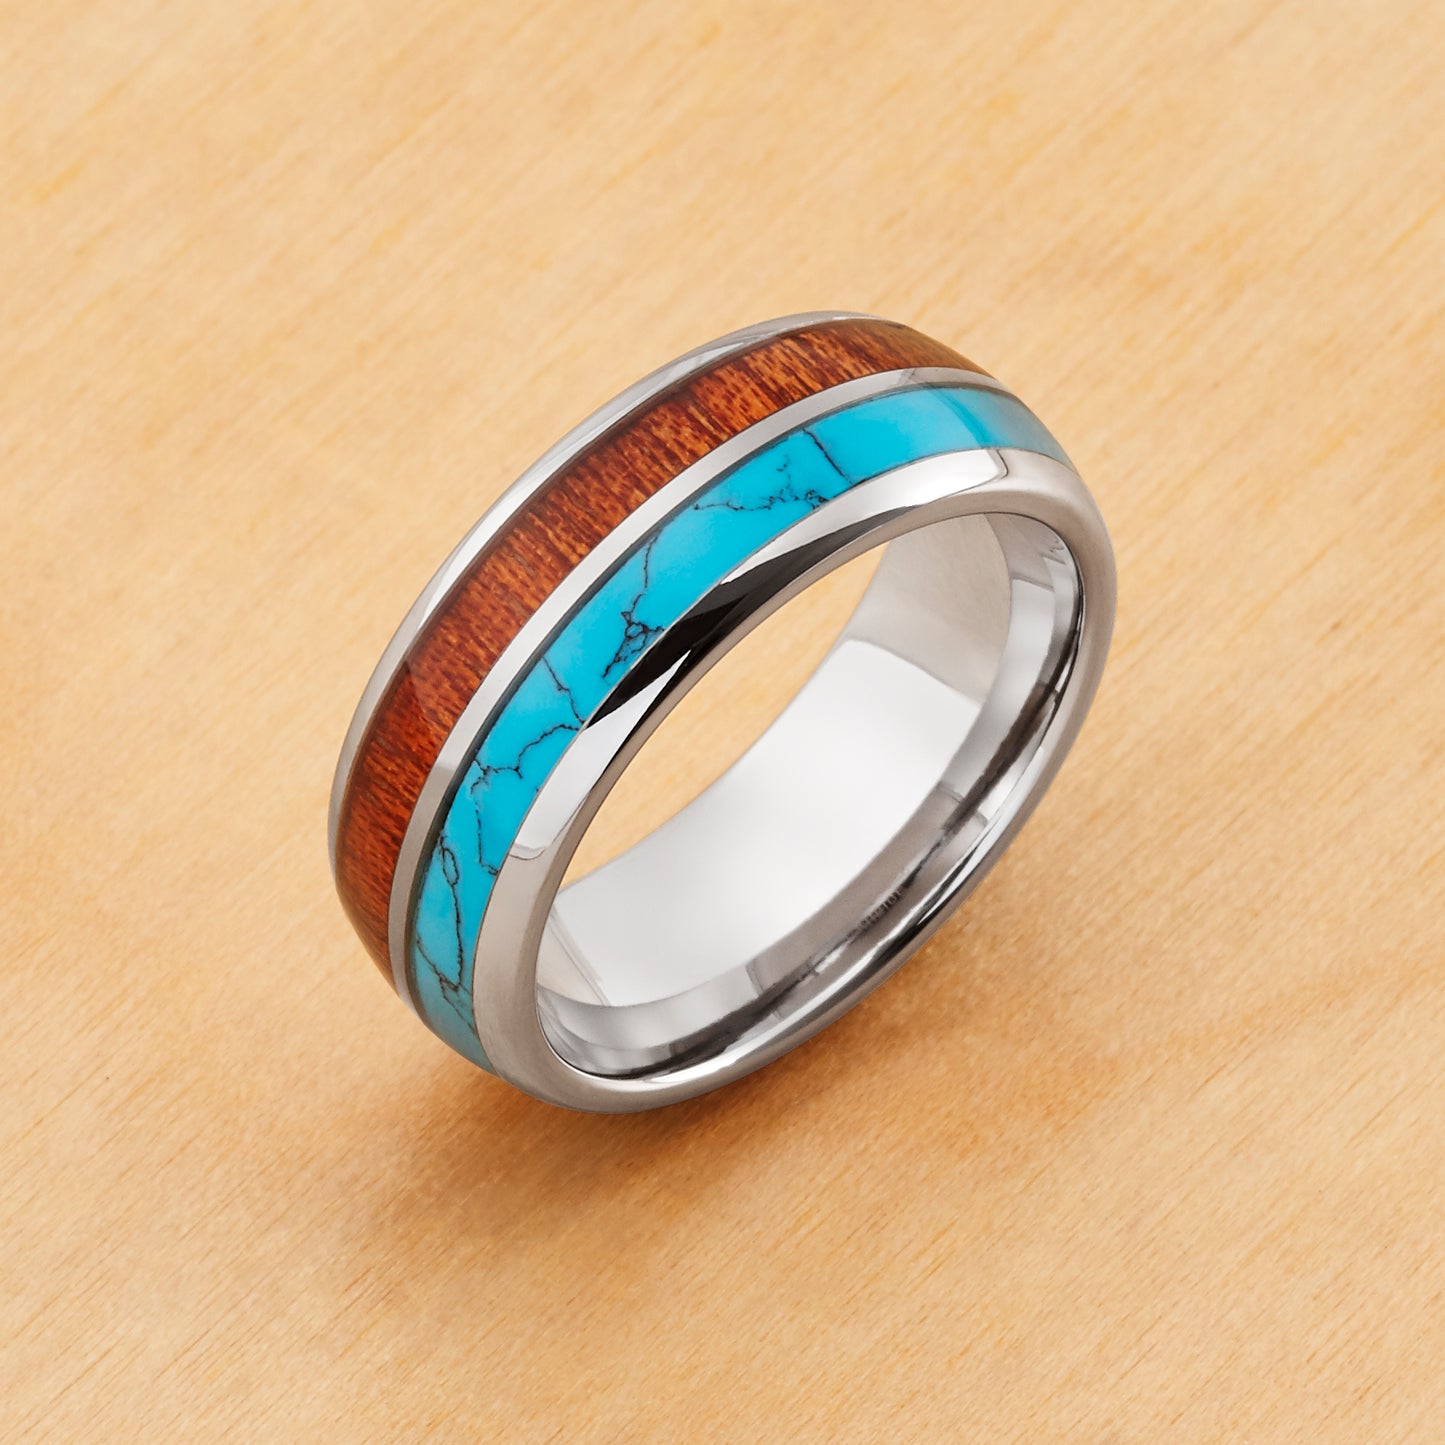 TR1060 - Tungsten Ring 8mm, Dome Ring Turquoise and Koa Wood Inlay